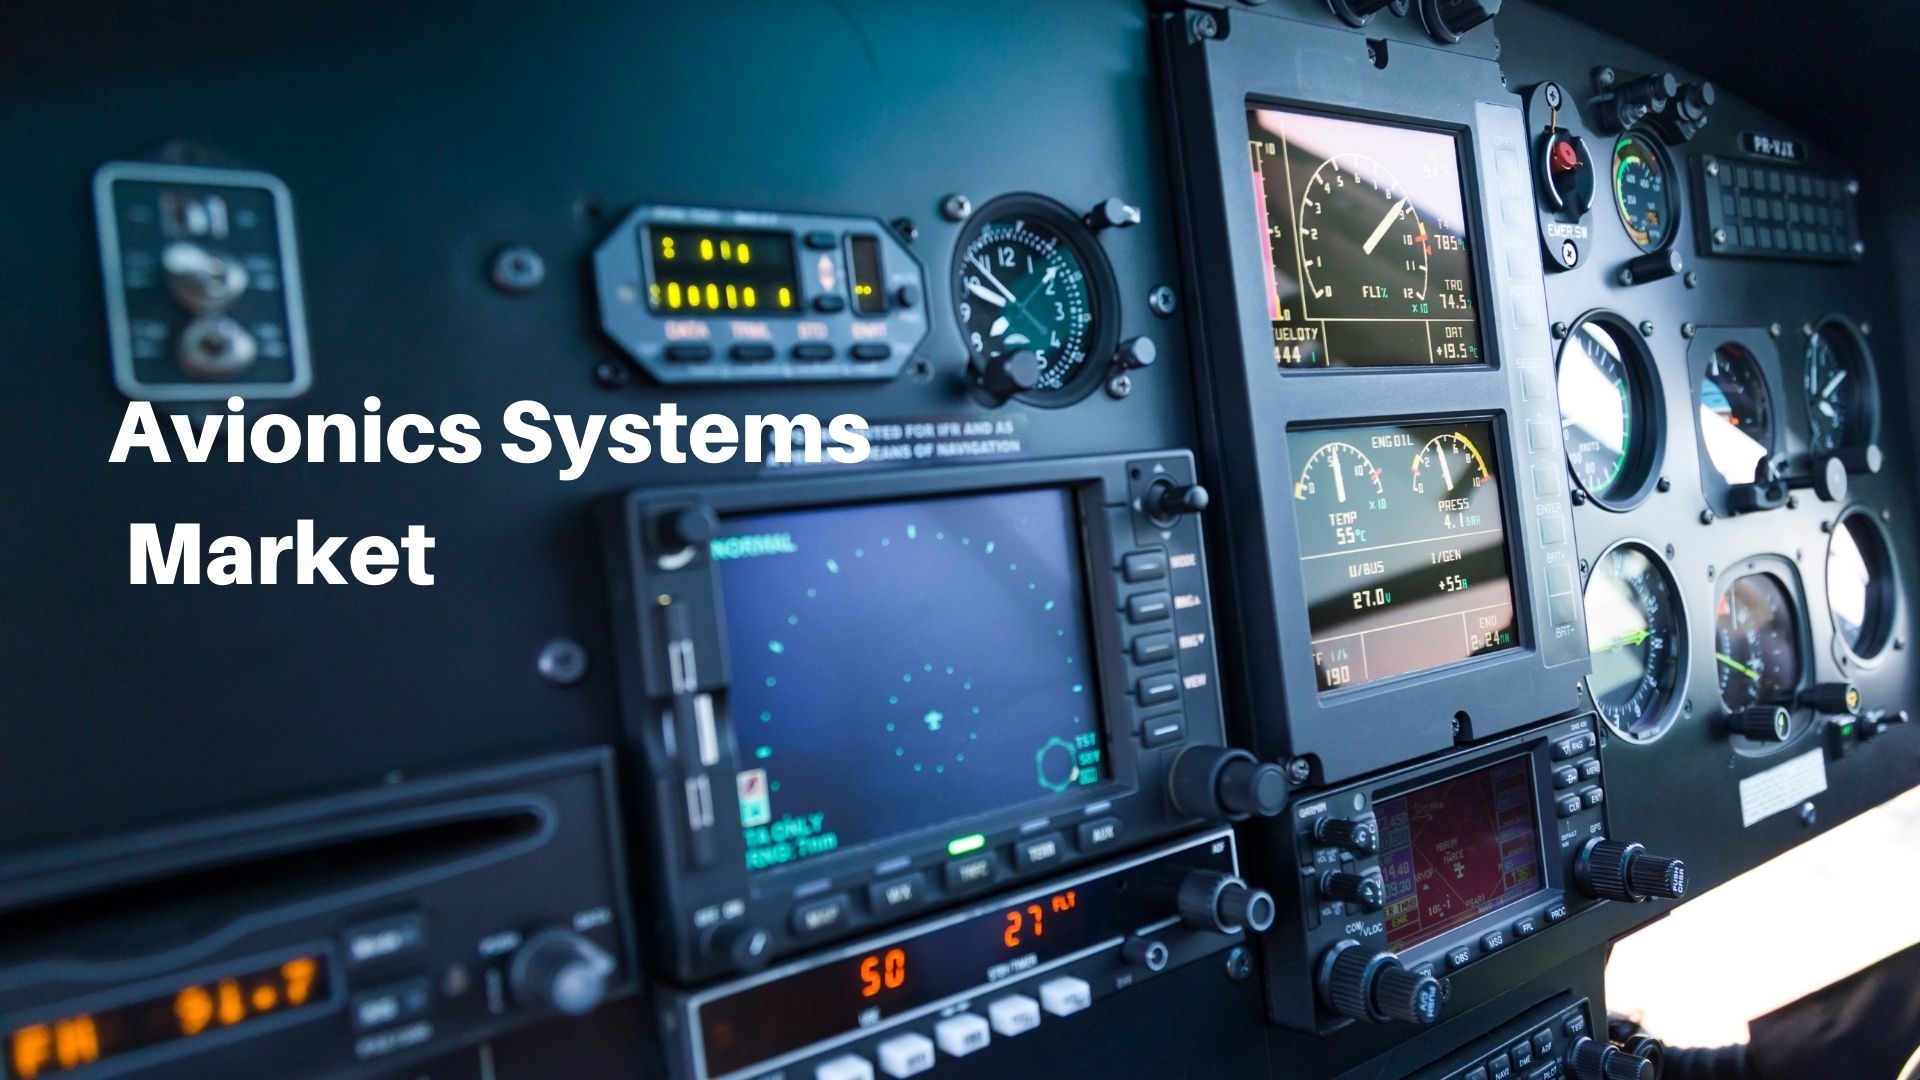 Avionics Systems Market Sales to Top USD 183.25 Bn in Revenues by 2032